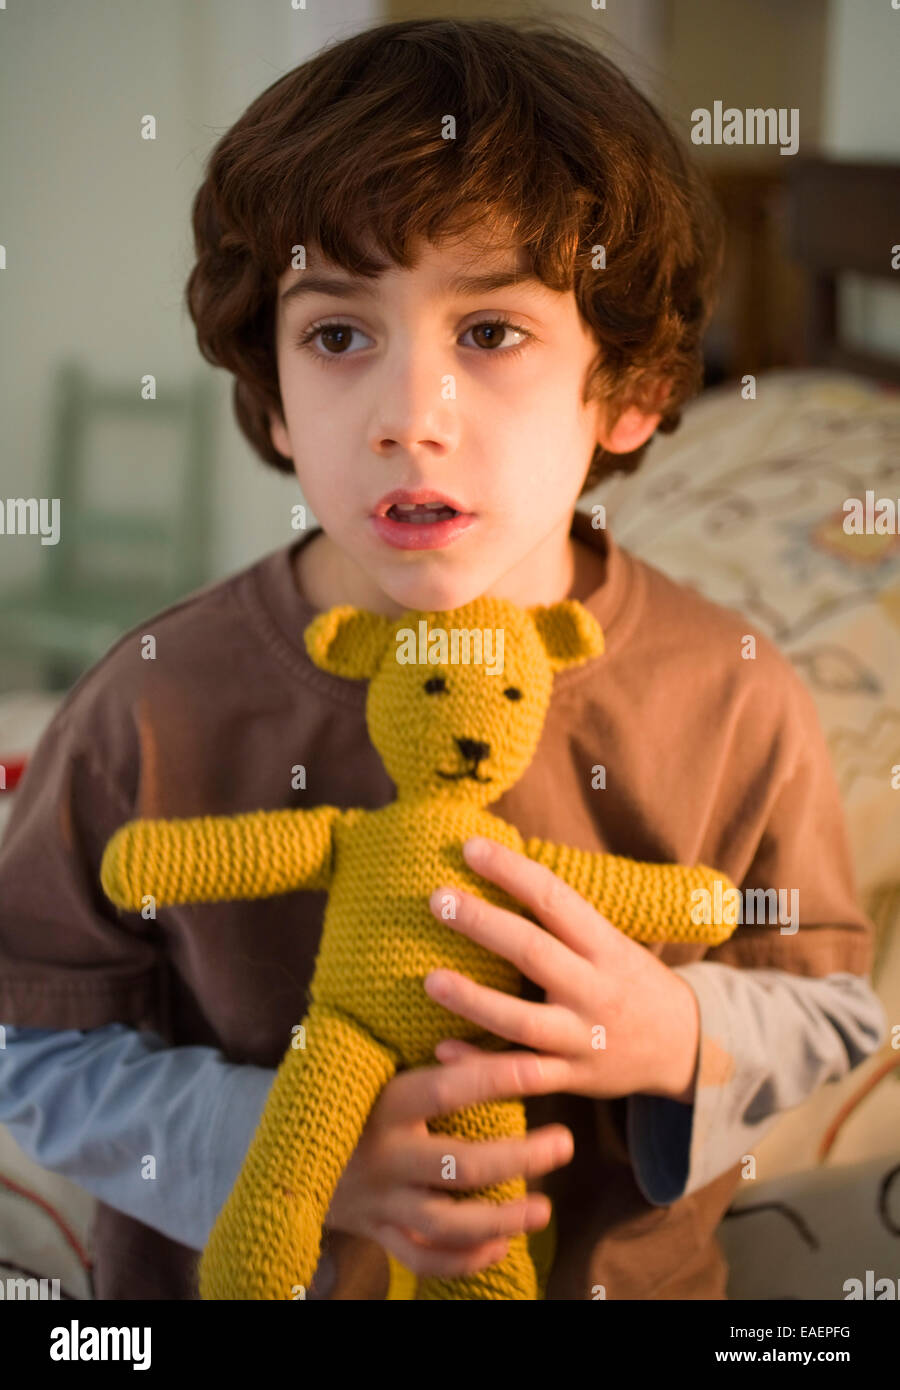 Young boy holding teddy bear Banque D'Images